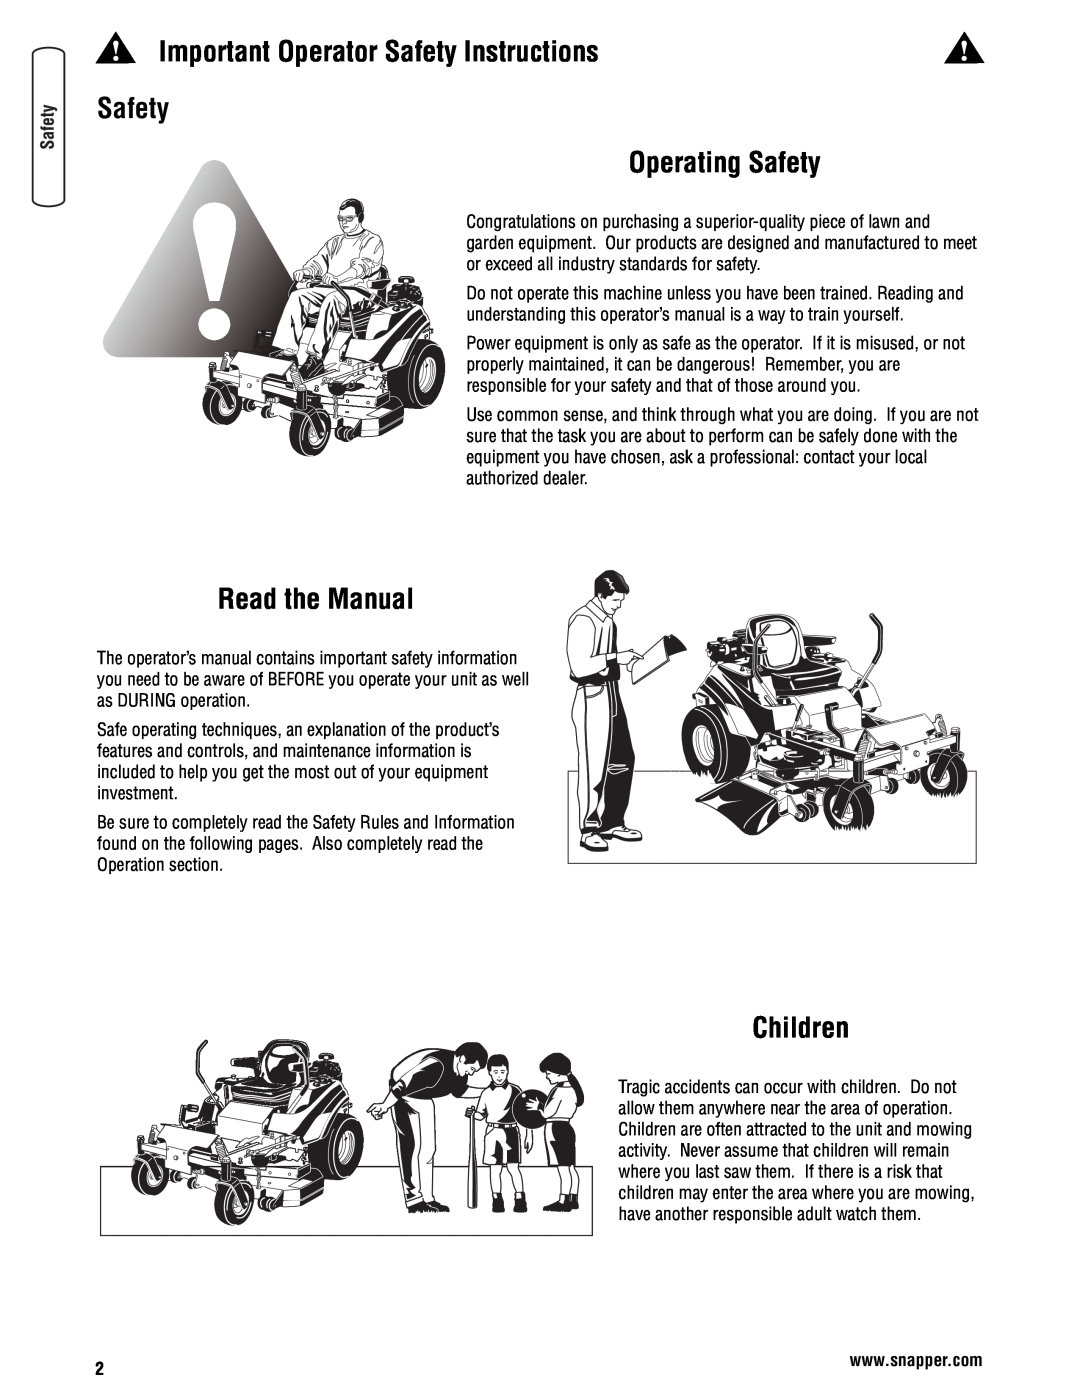 Snapper 355Z manual Important Operator Safety Instructions, Safety Operating Safety, Read the Manual, Children 